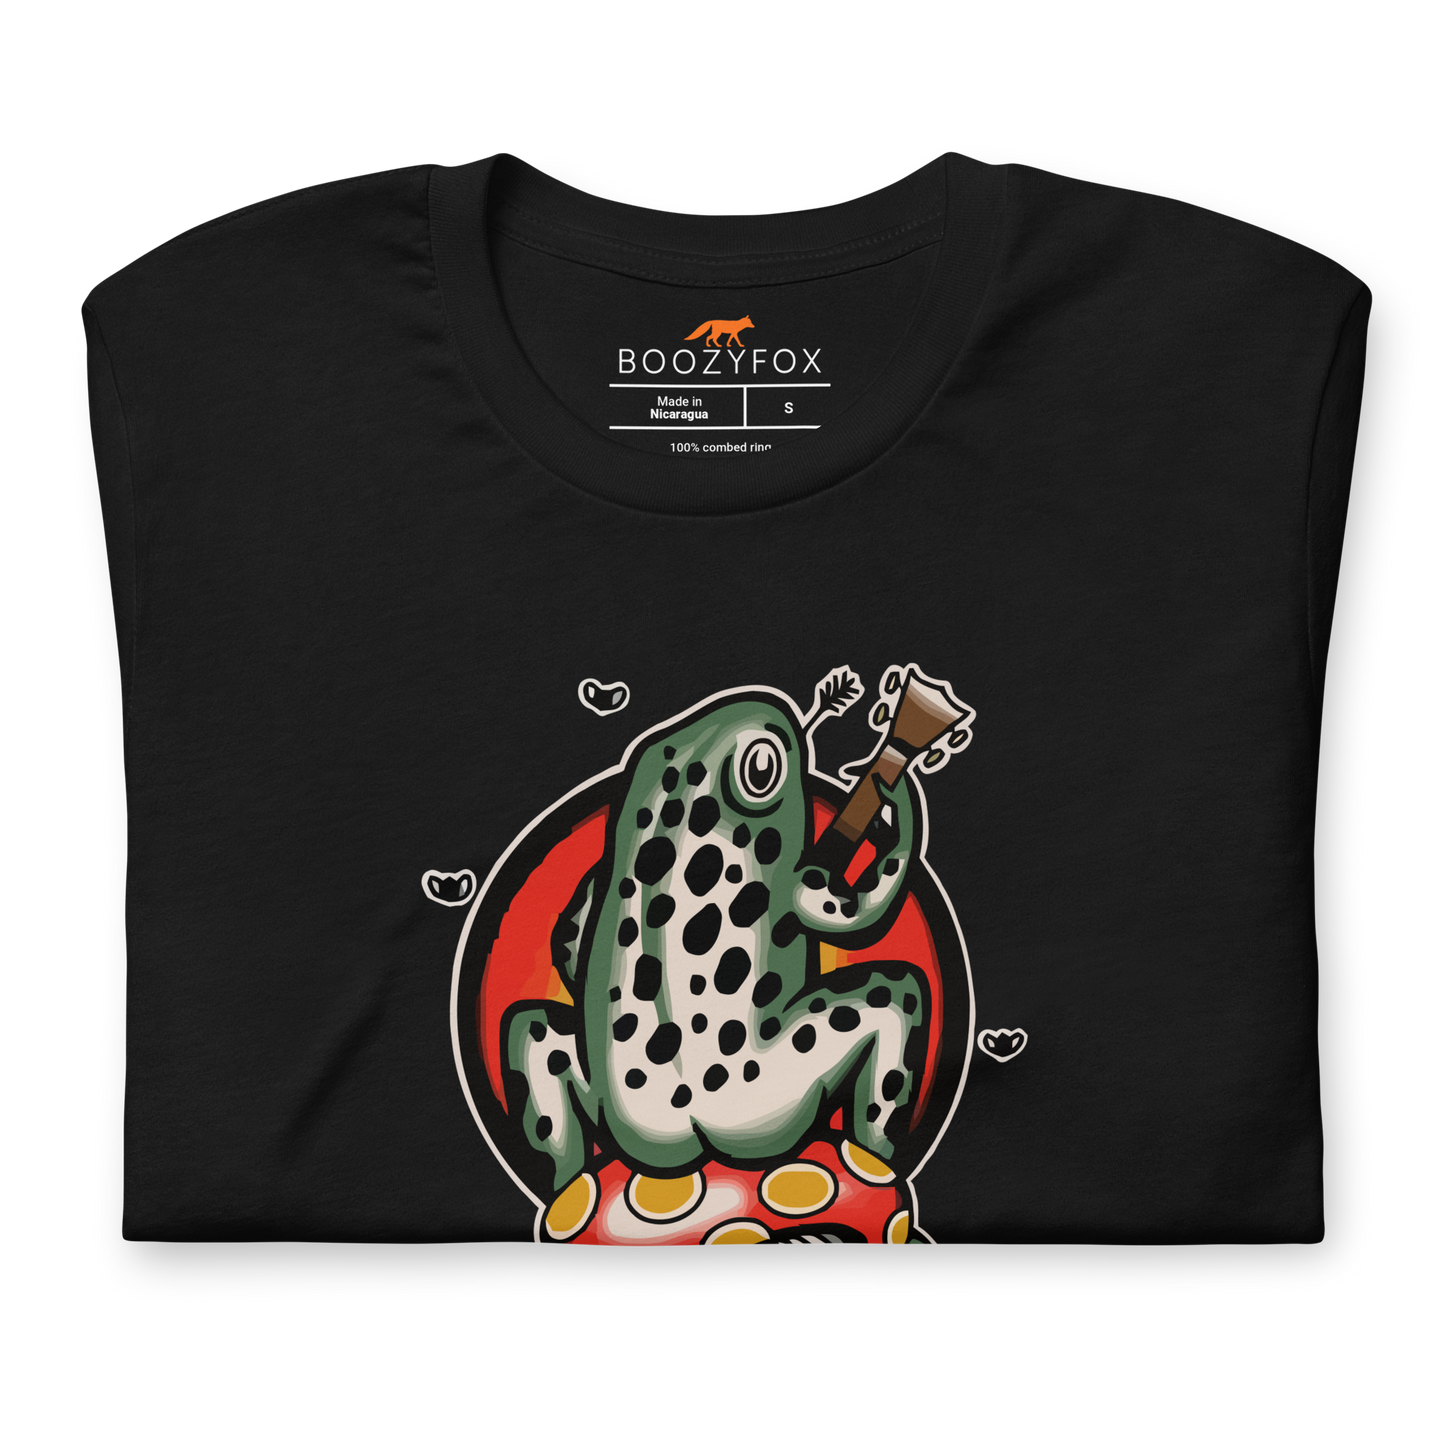 Front details of a Black Premium Frog Tee featuring a funny Frog 'n' Roll graphic on the chest - Funny Graphic Frog Tees - Boozy Fox